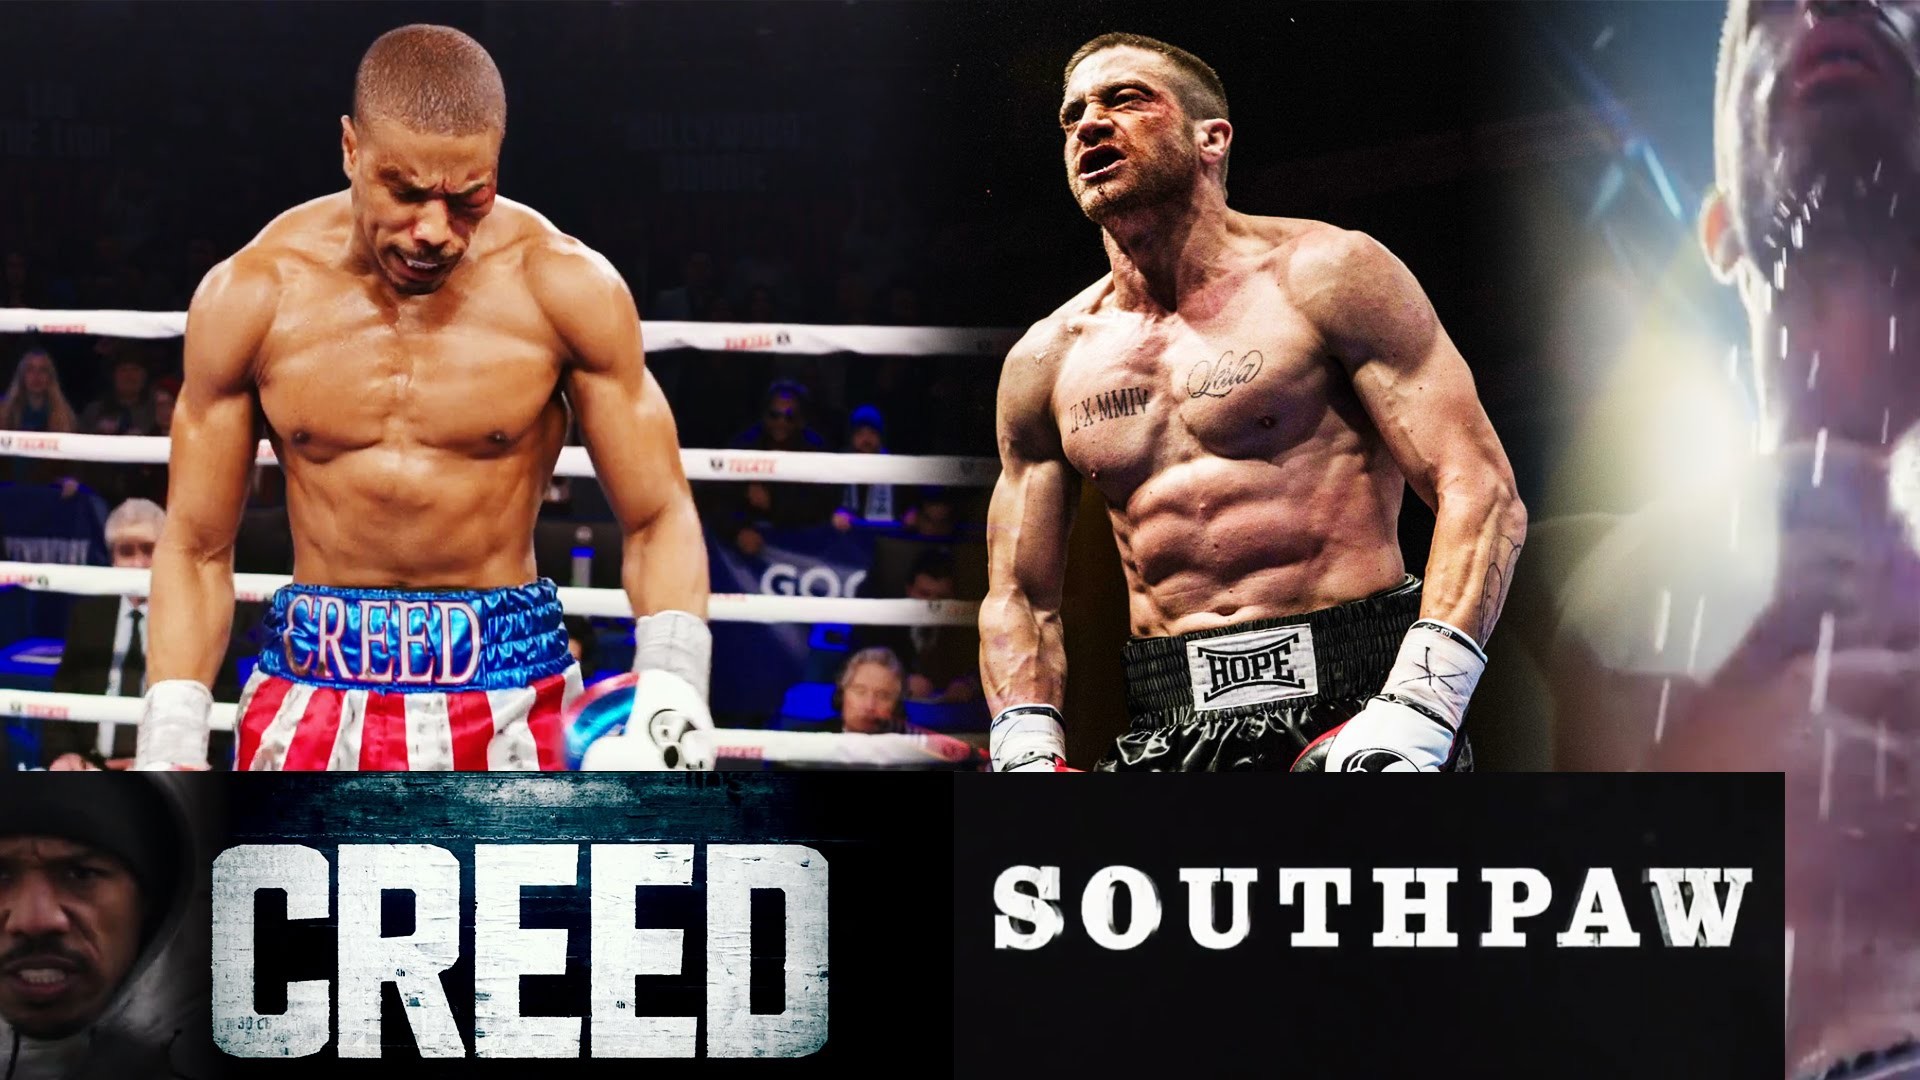 Southpaw Wallpapers